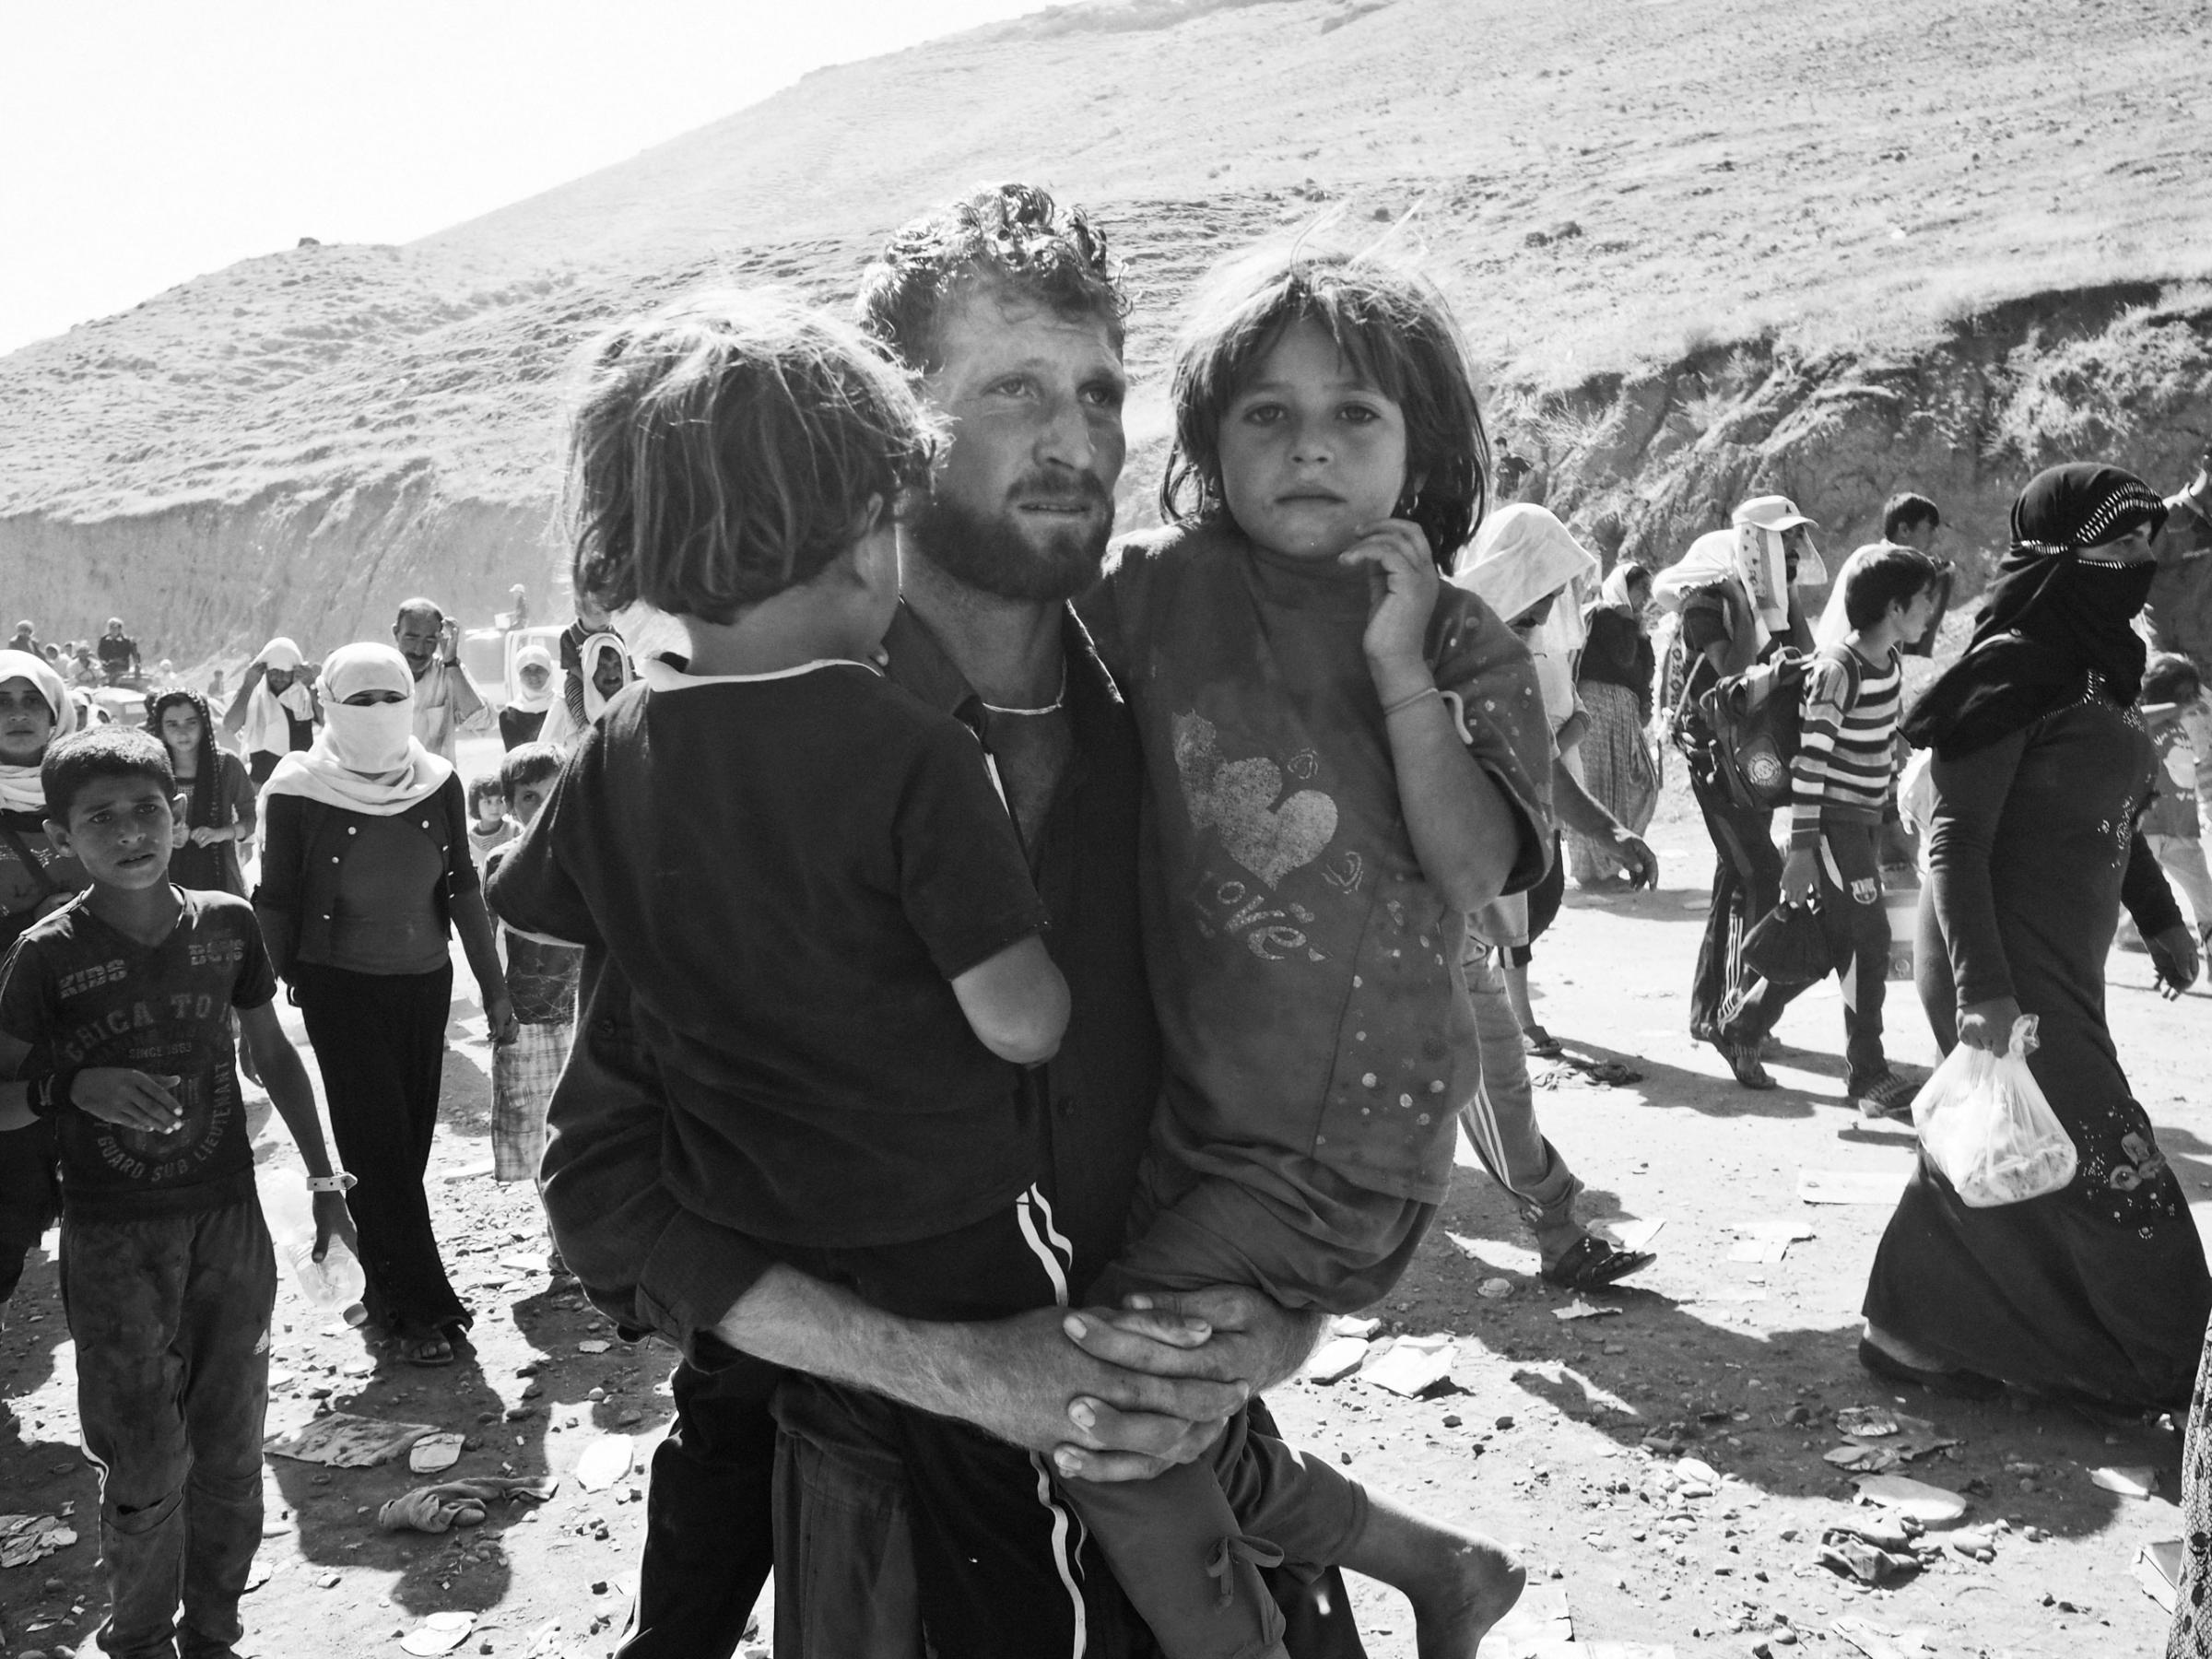 A displaced Yezidi man carries his two daughters as he crosses the border into Kurdish-controlled northern Iraq near the village of Fishkhabur. Iraq. Aug. 10, 2014.